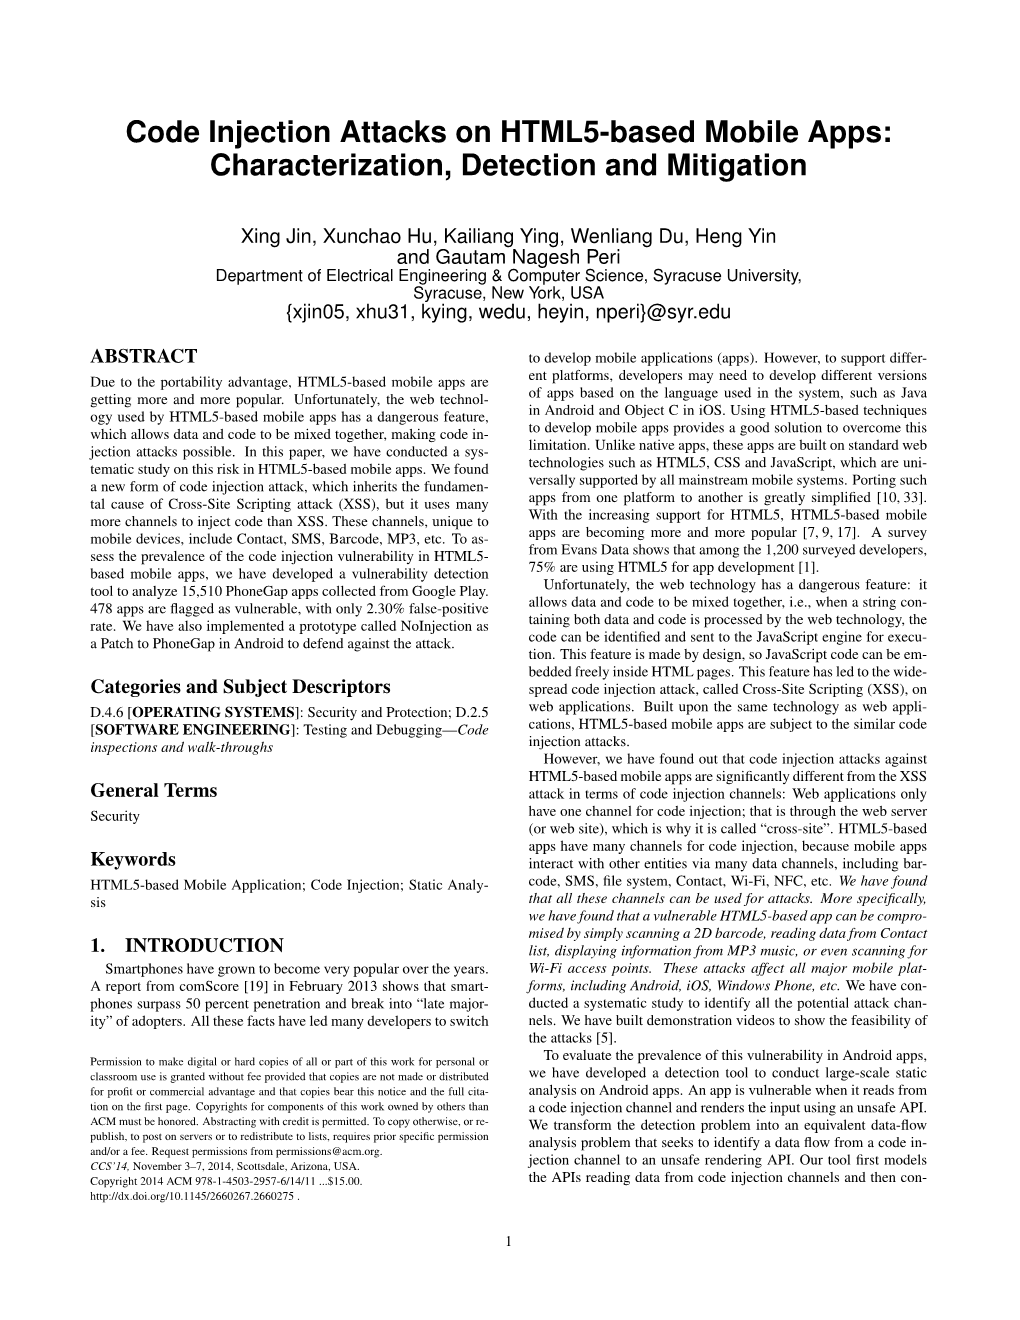 Code Injection Attacks on HTML5-Based Mobile Apps: Characterization, Detection and Mitigation